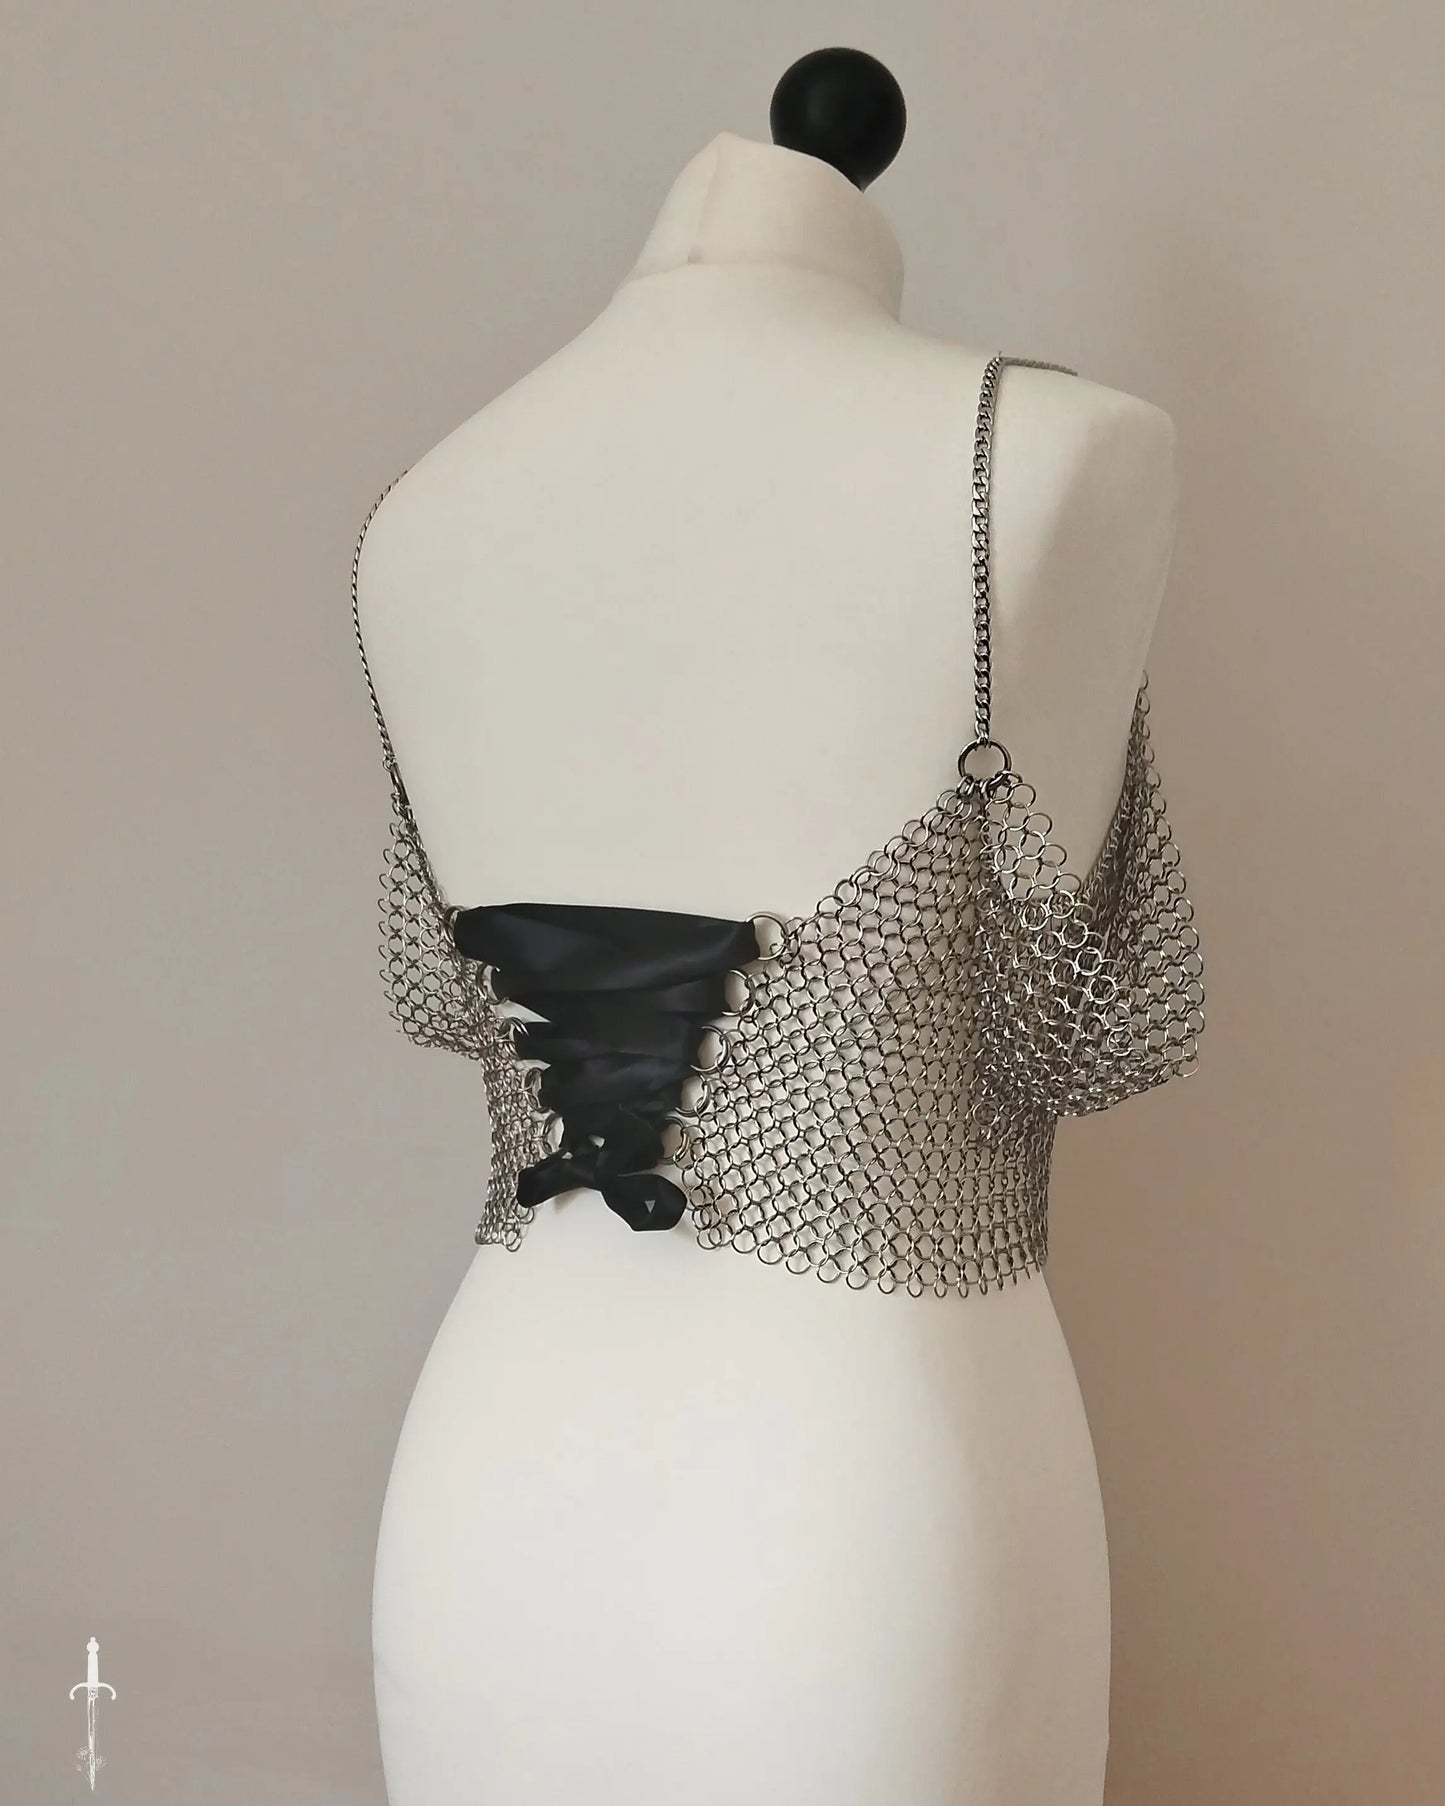 The Off Shoulder Chainmail Top in Stainless Steel